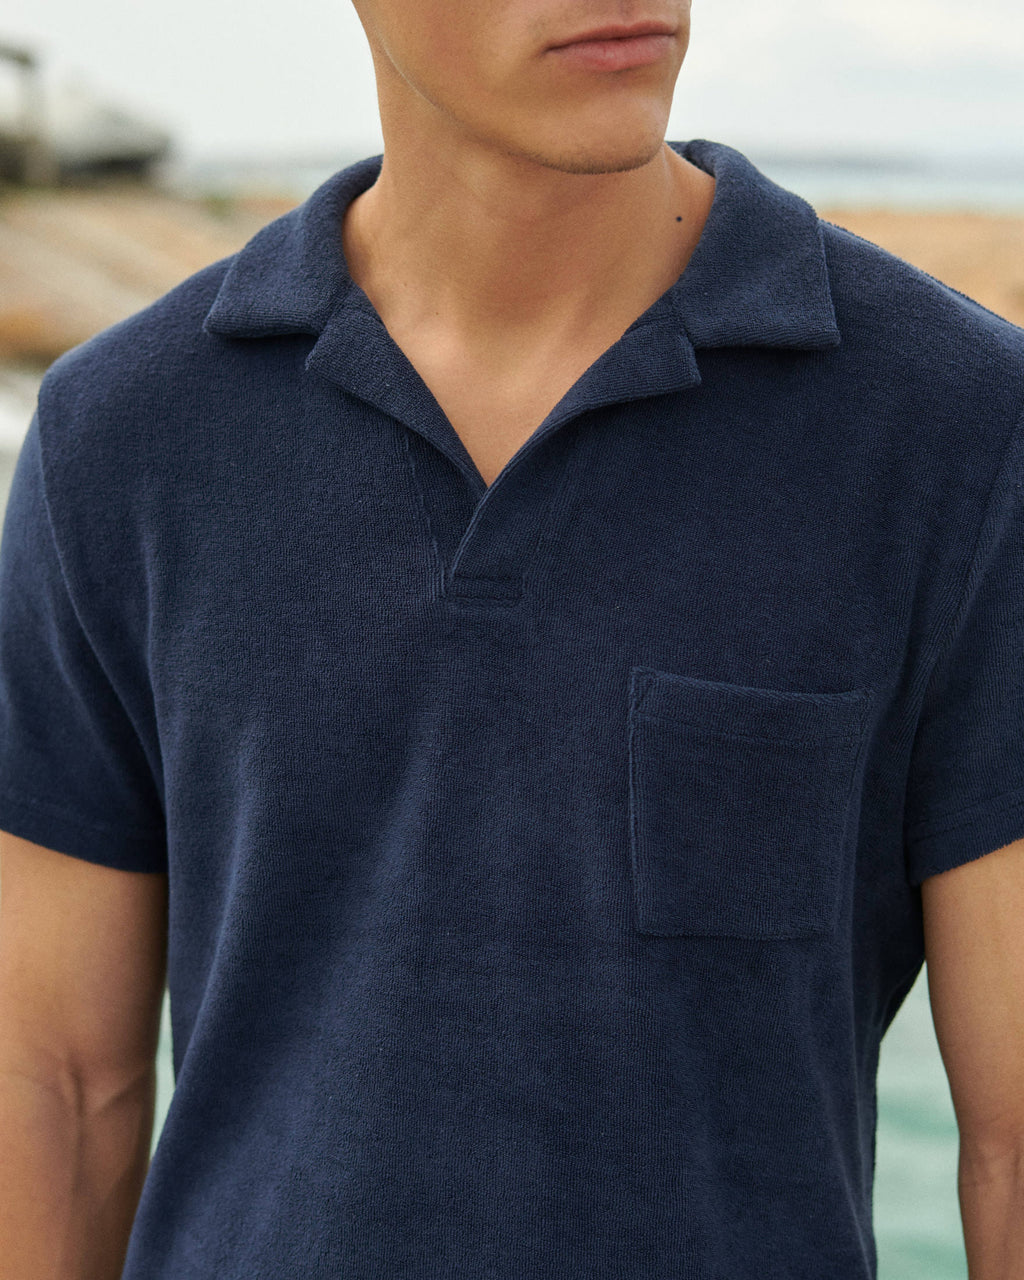 Olive Polo Shirt - Made in Portugal - Navy Terry Cotton